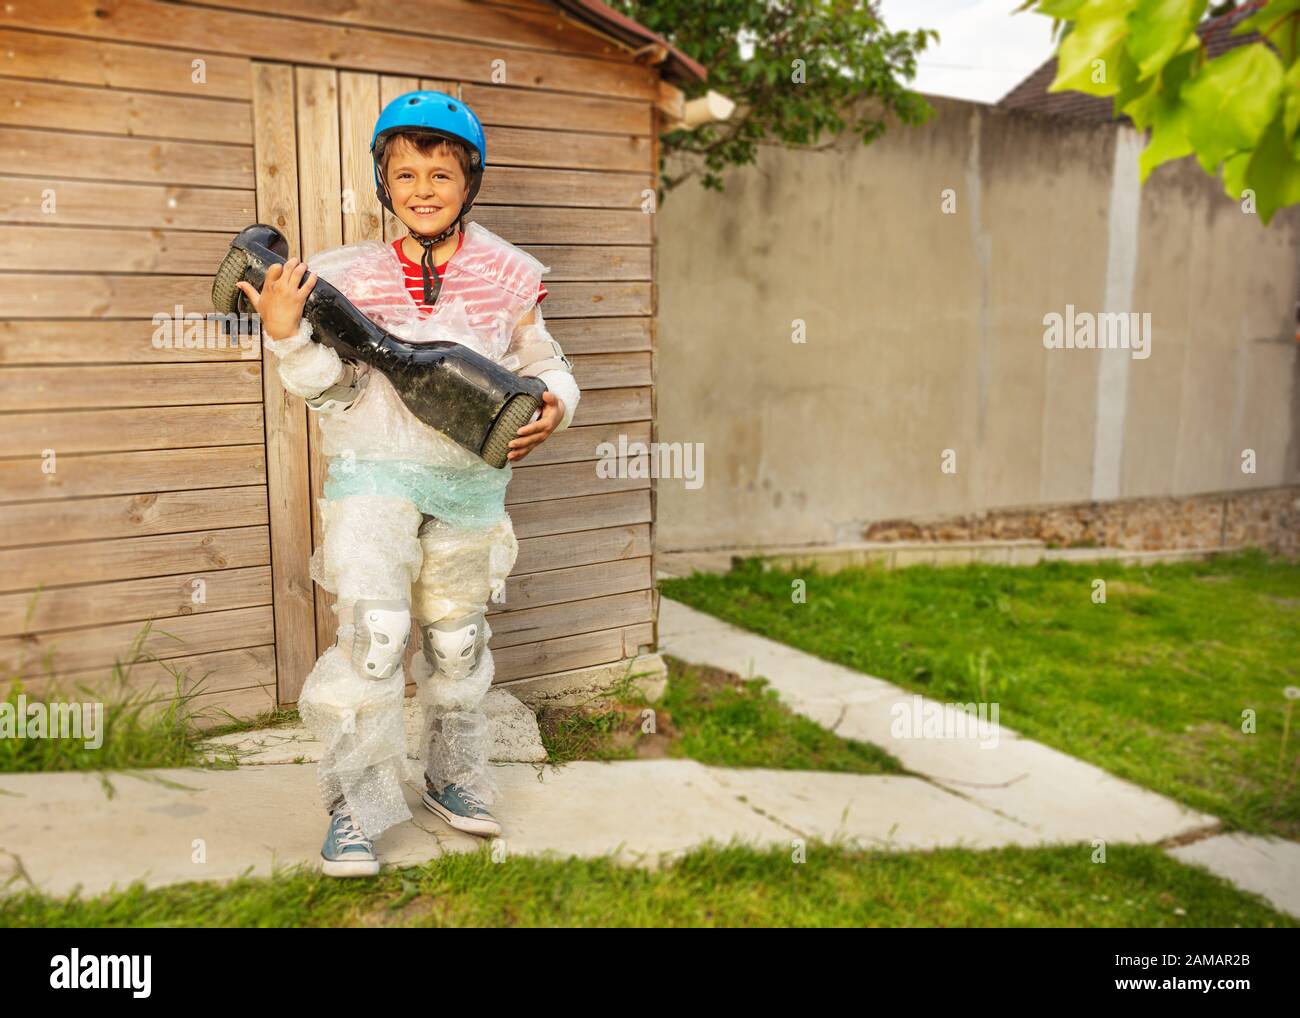 EDITORIAL ONLY - Over protection parenting helicopter parents kid wrapped  in bubble wrap to protect from hurt or injury Stock Photo - Alamy